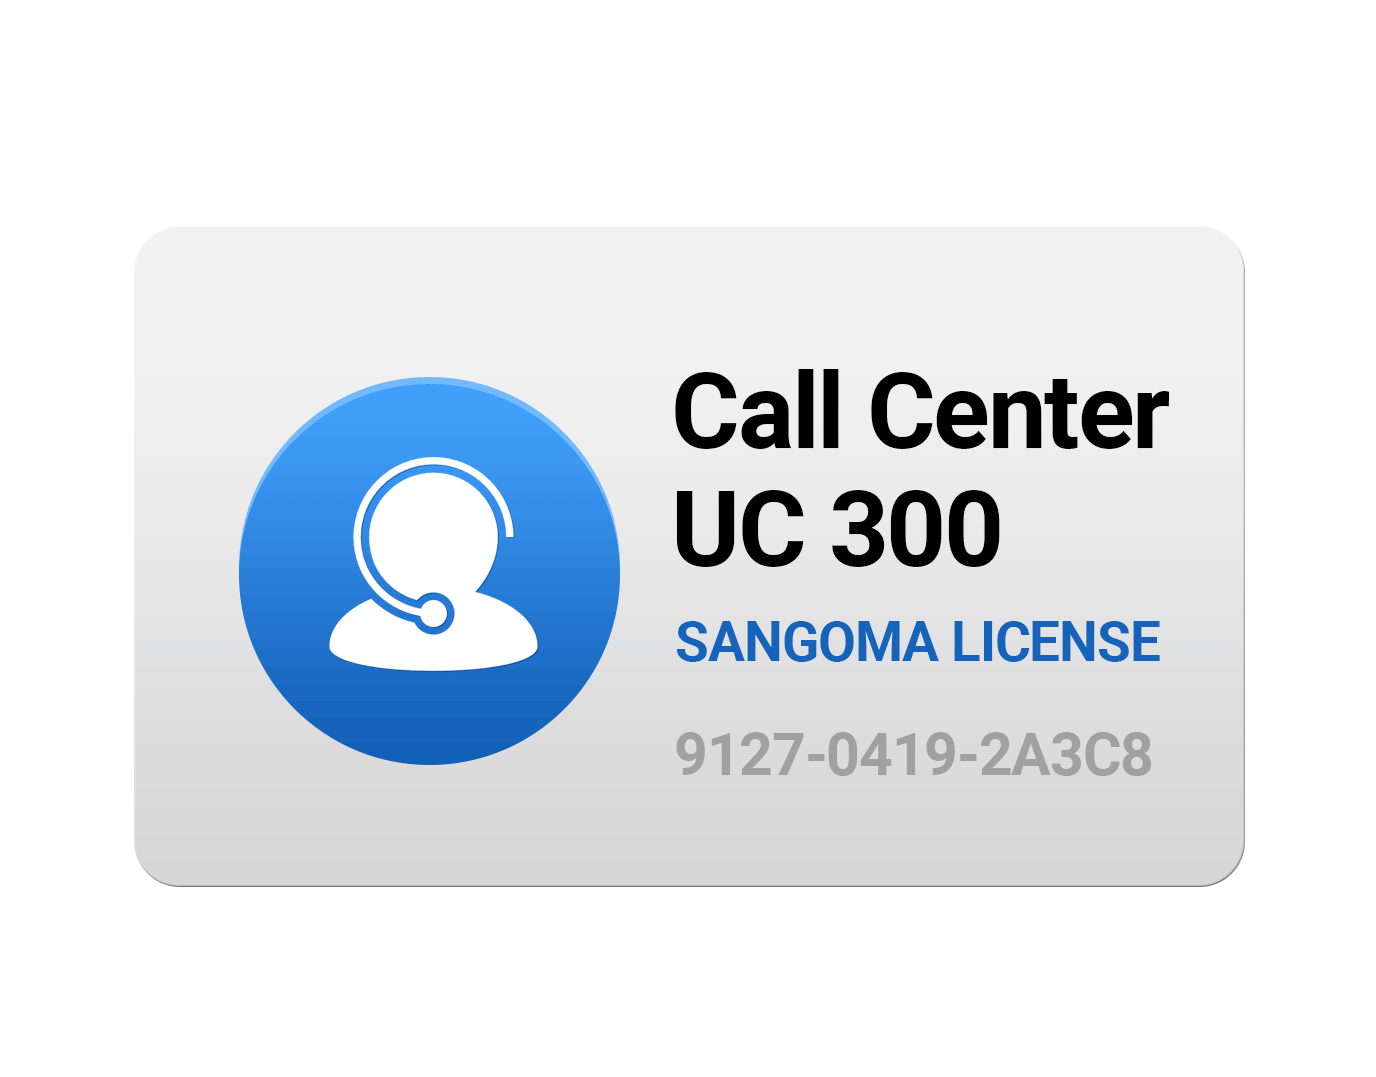 Call Center Features License for UC 300